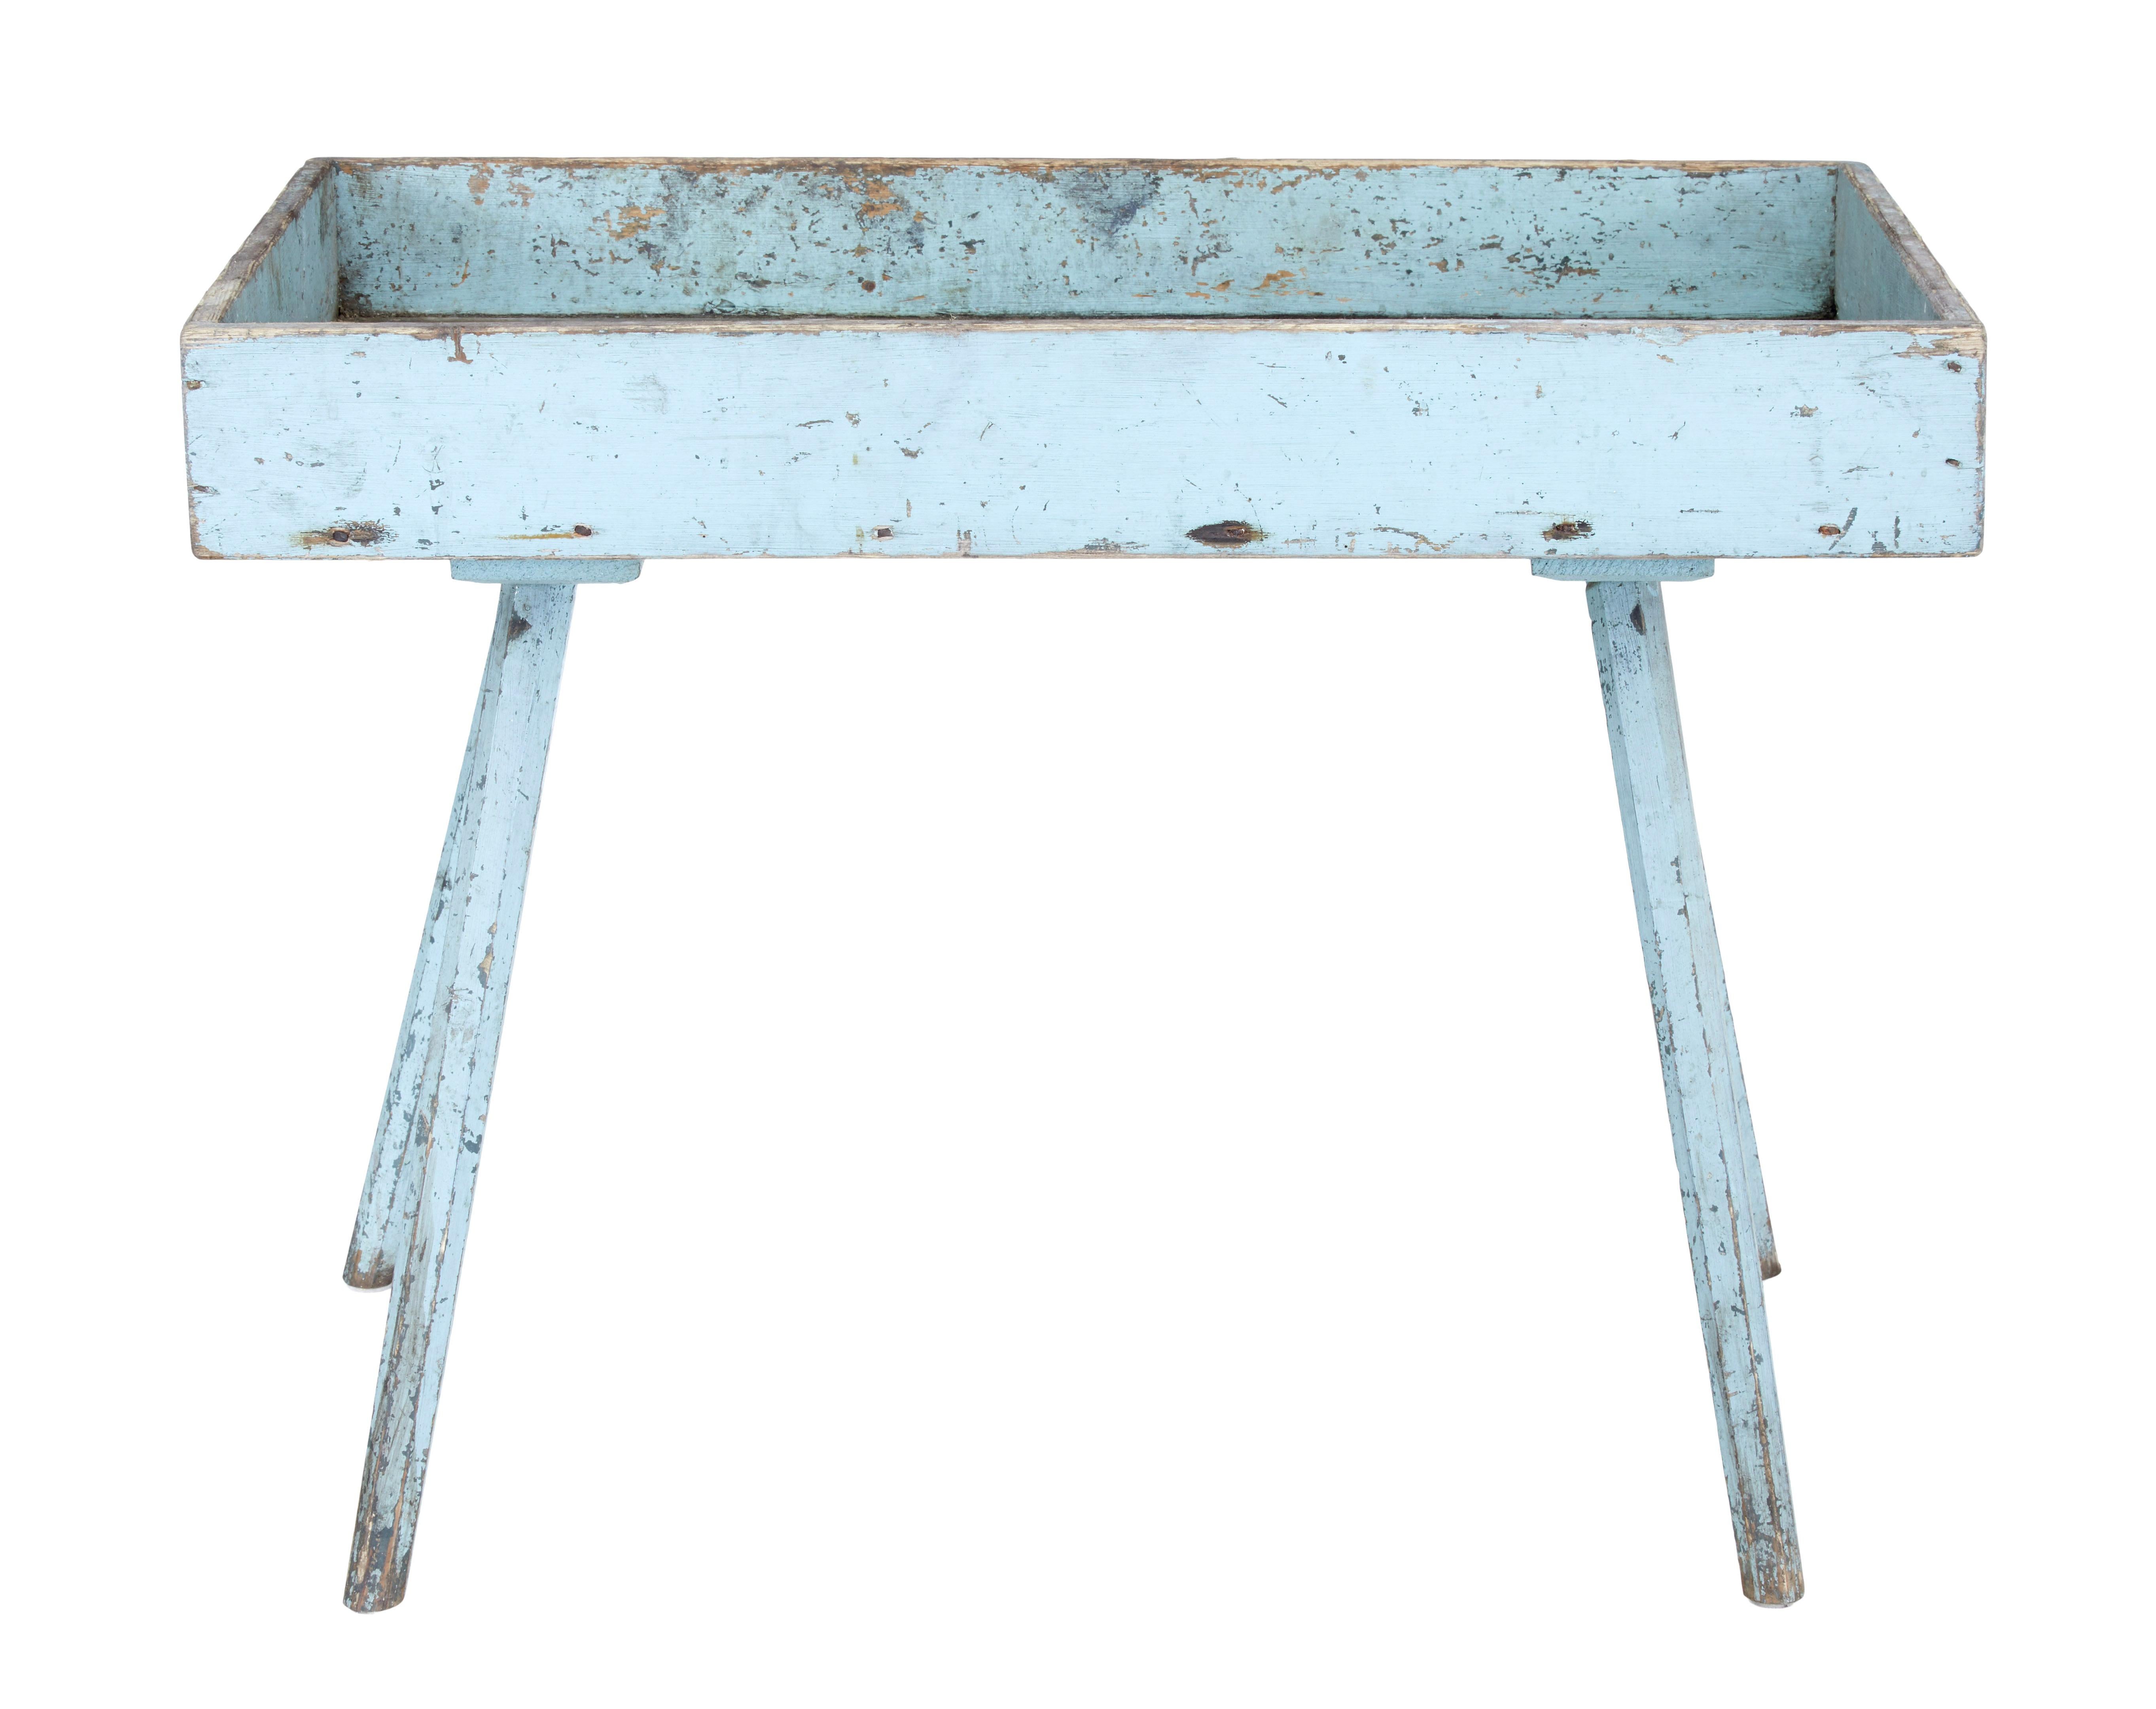 19th Century Rustic Painted Pine Garden Room Tray Table For Sale 2